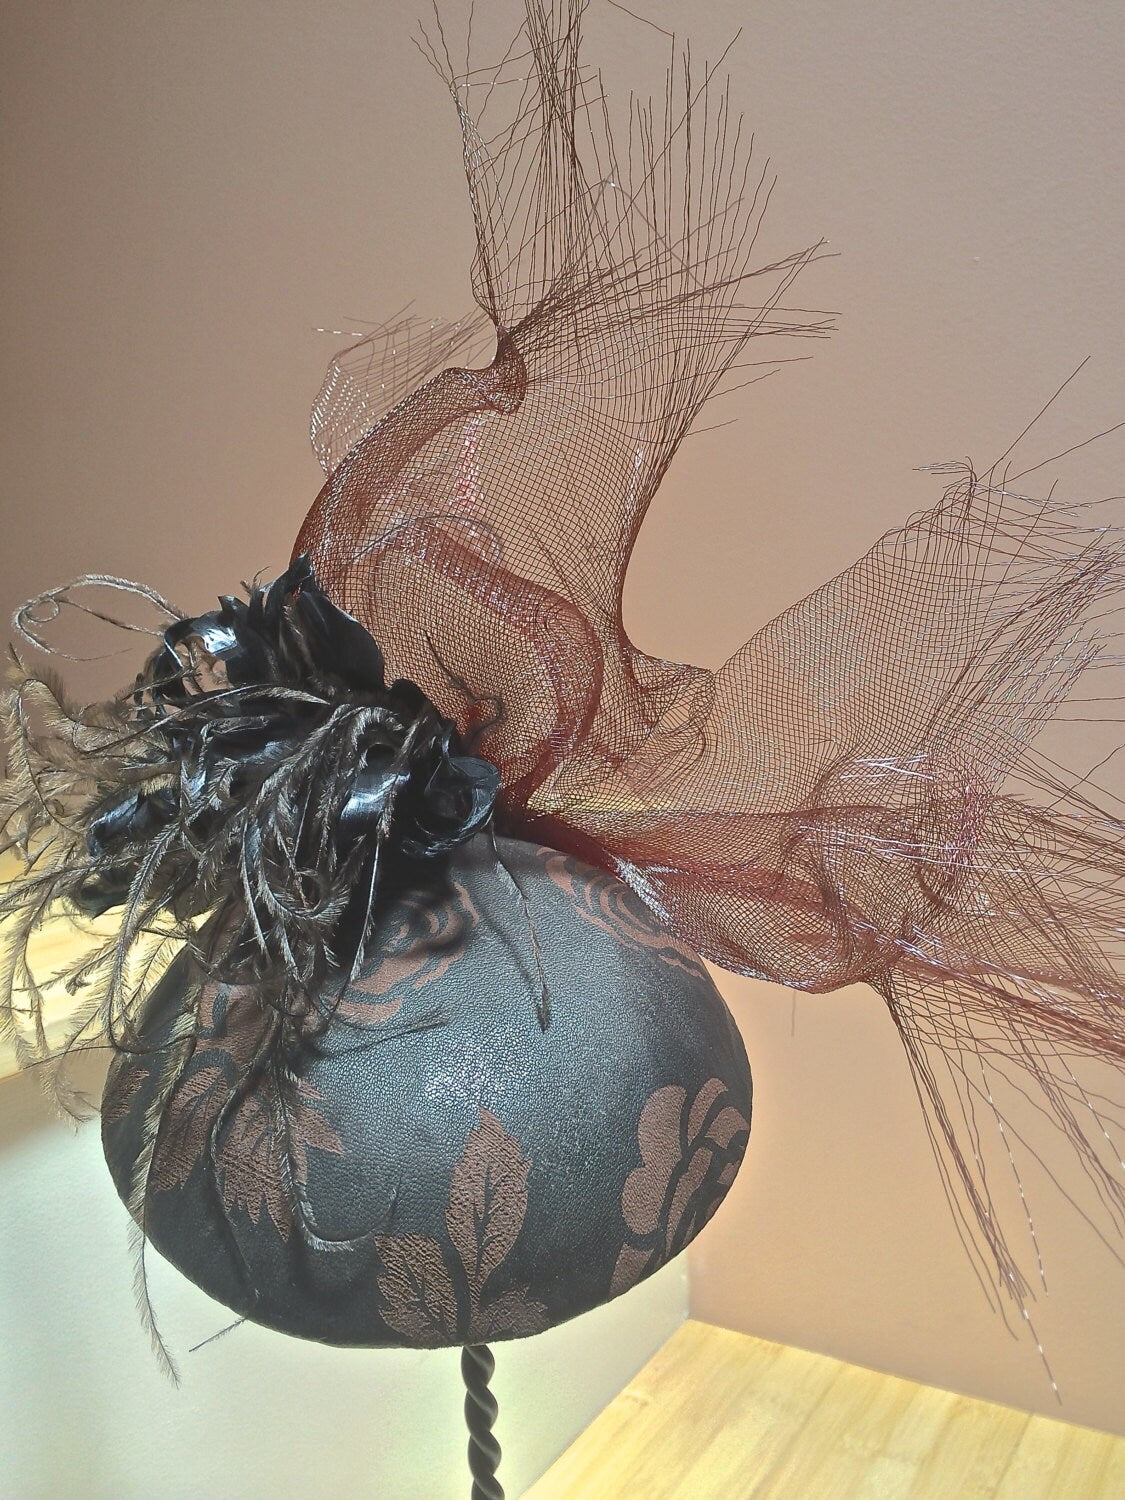 Black and tan leather fascinator, Goth headpiece, Royal Ascot hat, Race track hat-Cocktail Hat-Crinoline and Feathers-Goth Headpiece-Bespoke